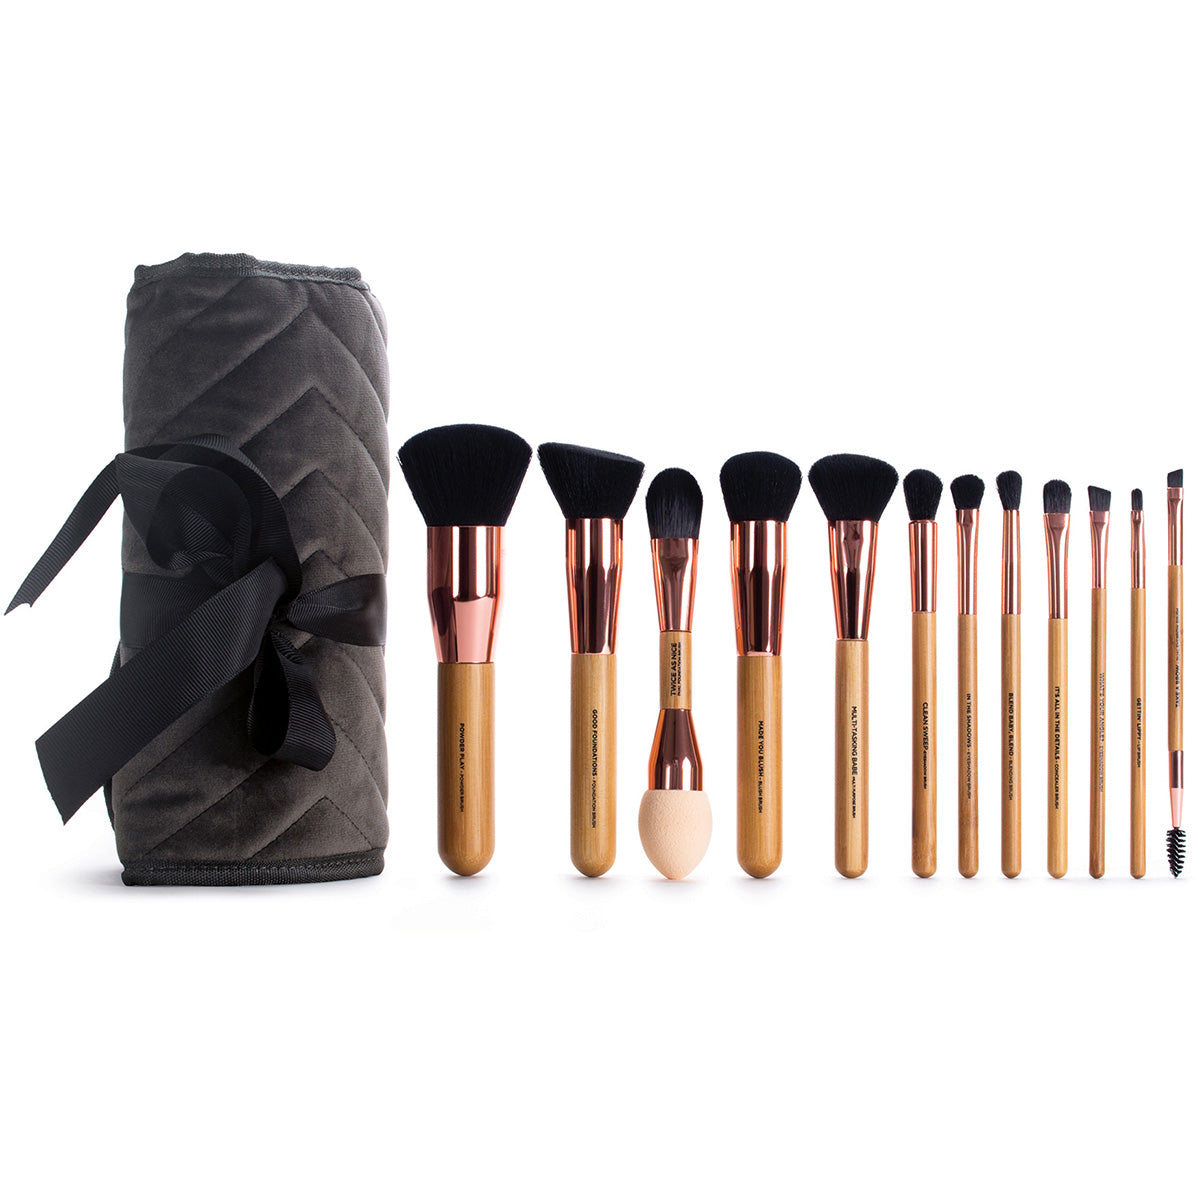 A WHOLE LOT OF LOVELY – set of 12 makeup brushes in a rollup bag